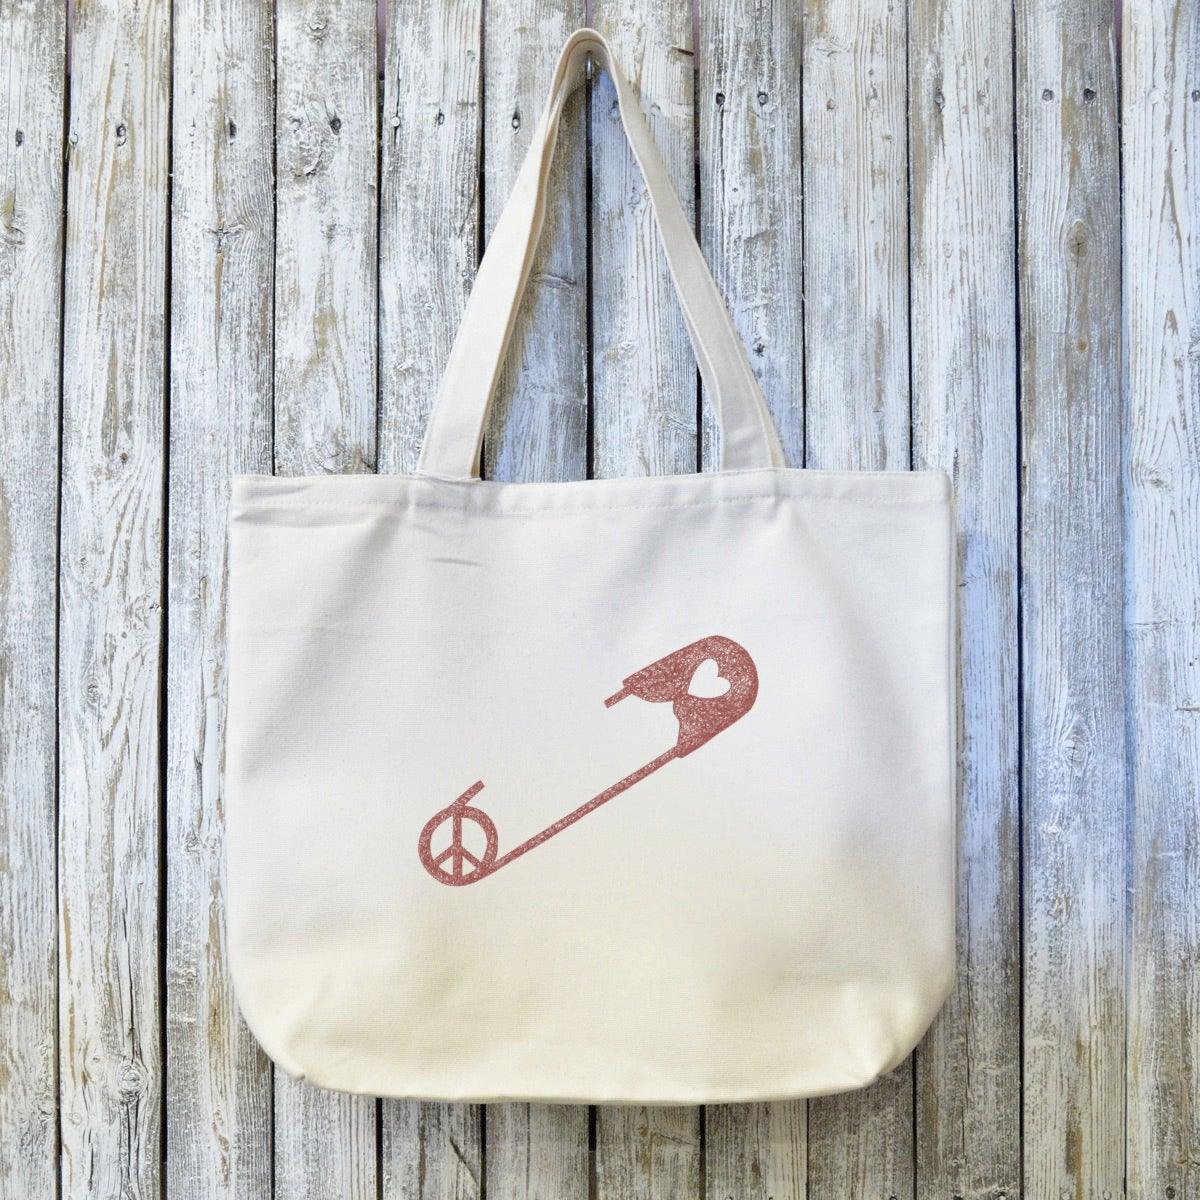 Safety Pin Tote Bag, Made in USA